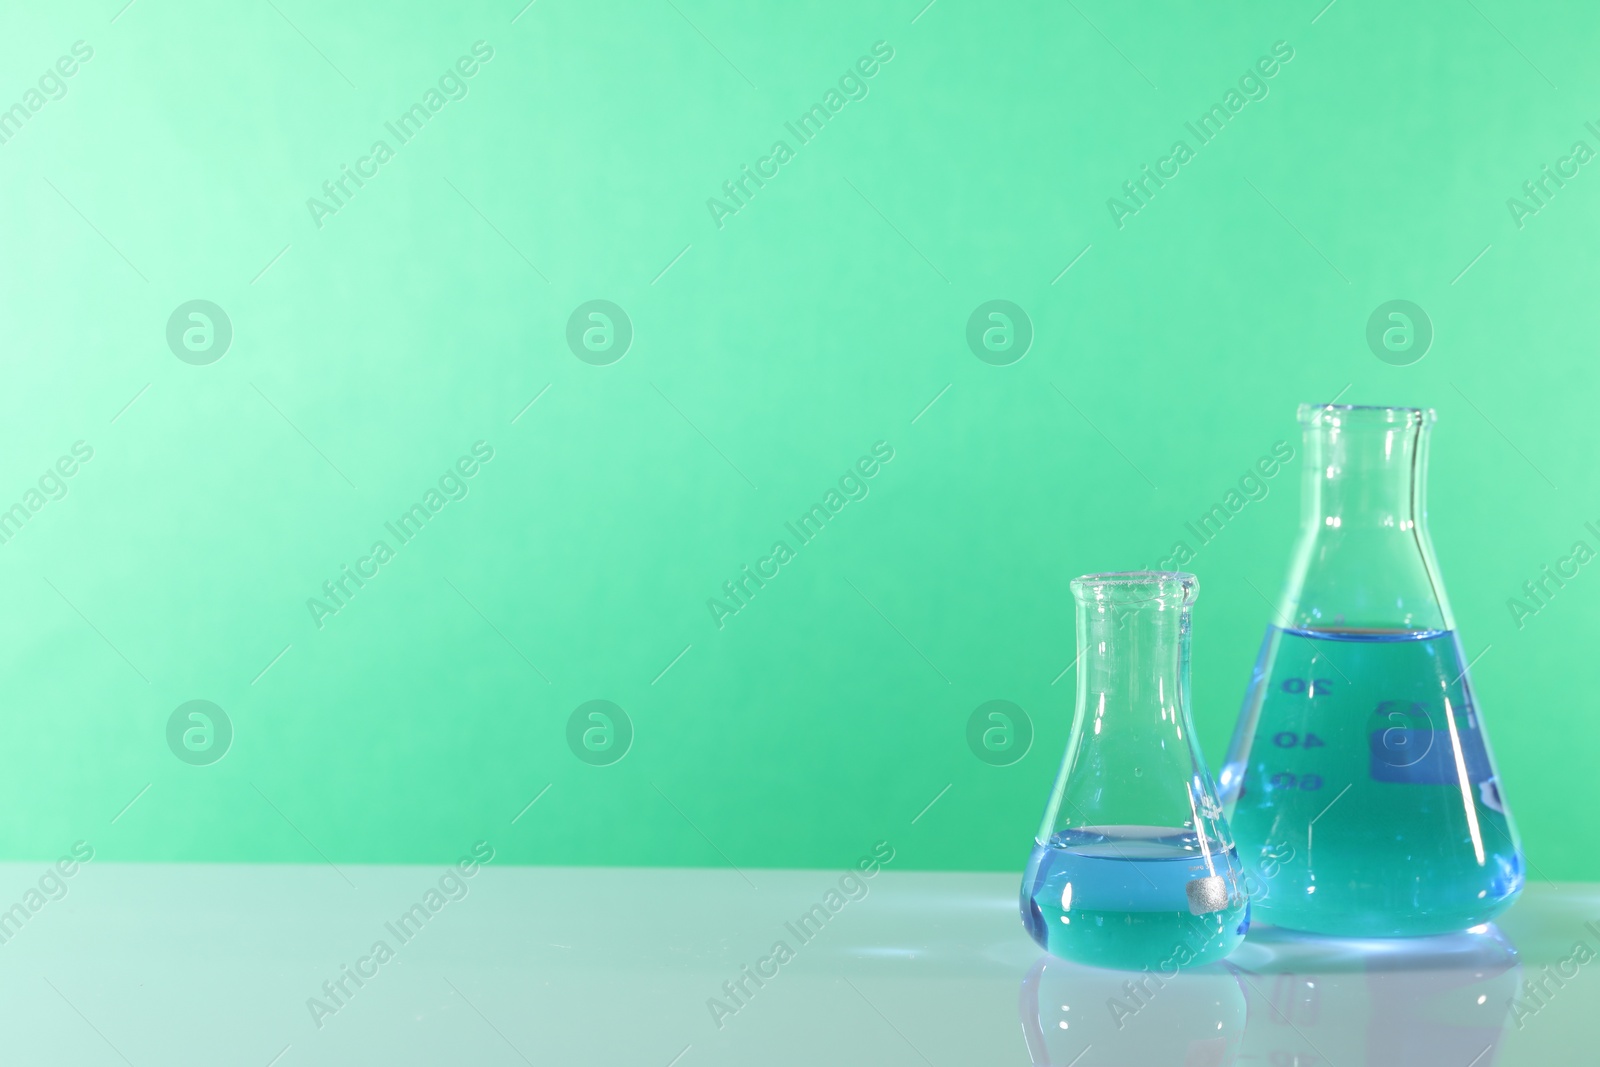 Photo of Laboratory analysis. Glass flasks on table against green background, space for text